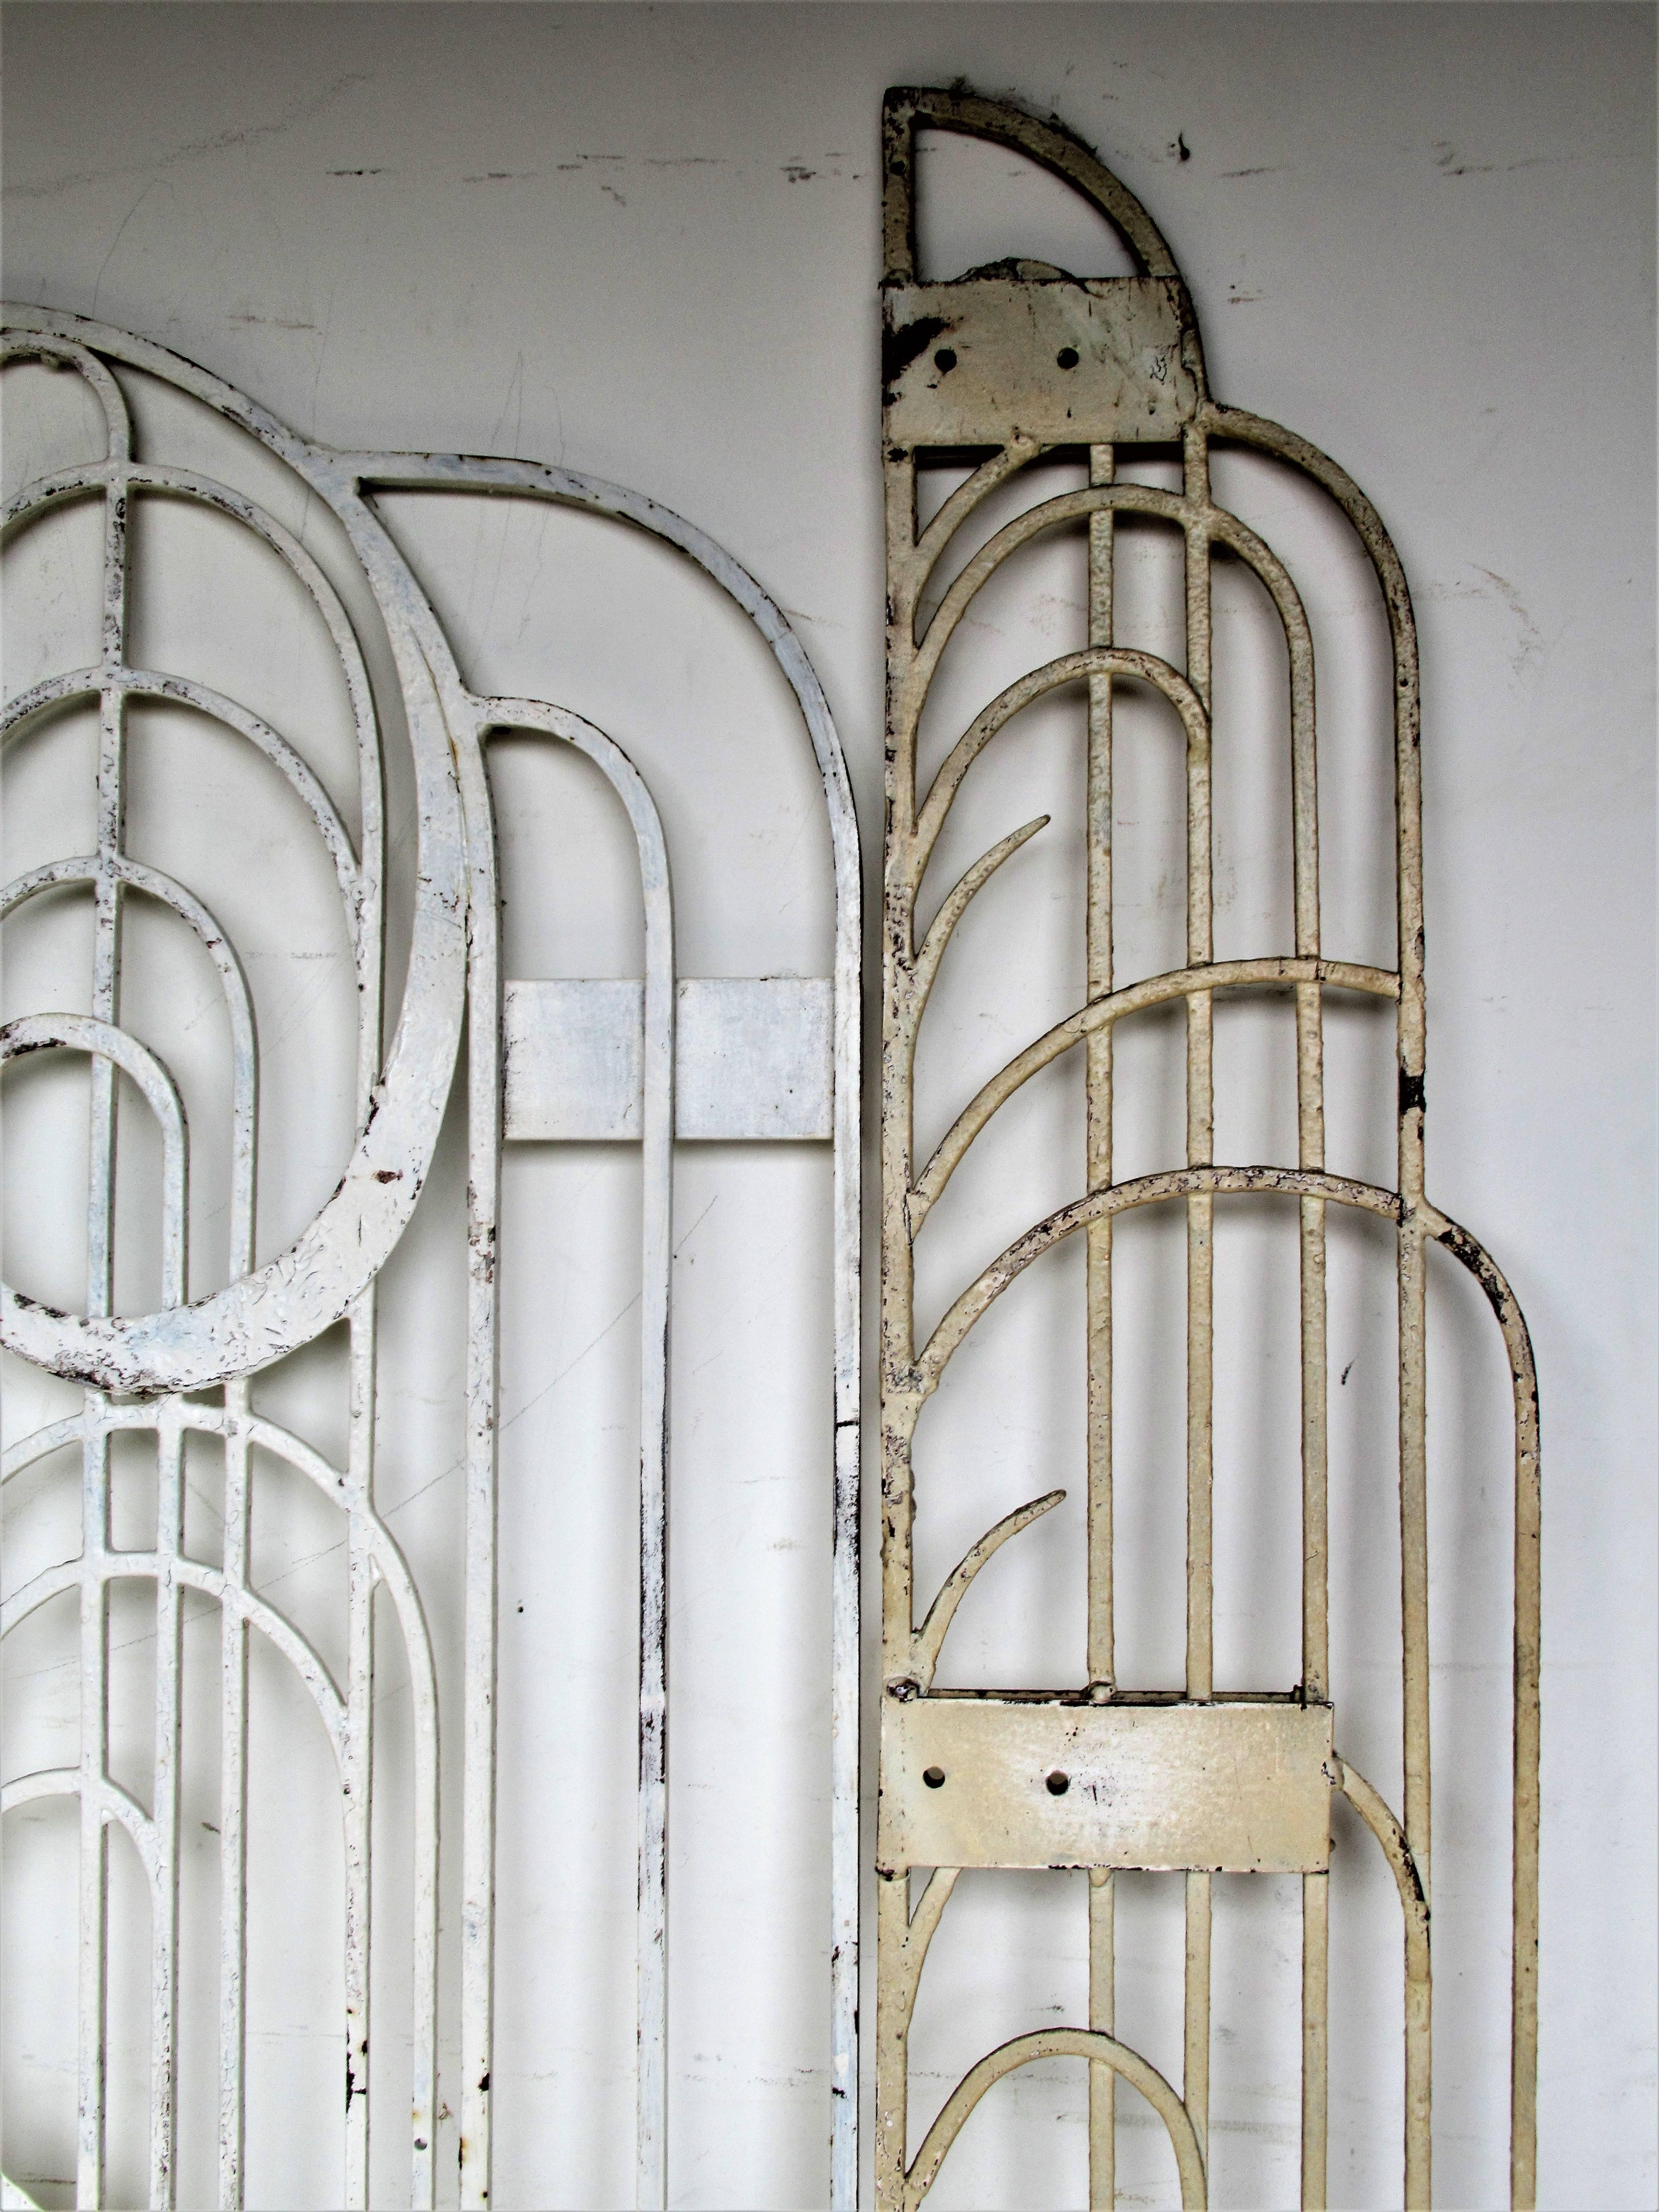 American Art Deco Architectural Hand Wrought Iron Gates 4